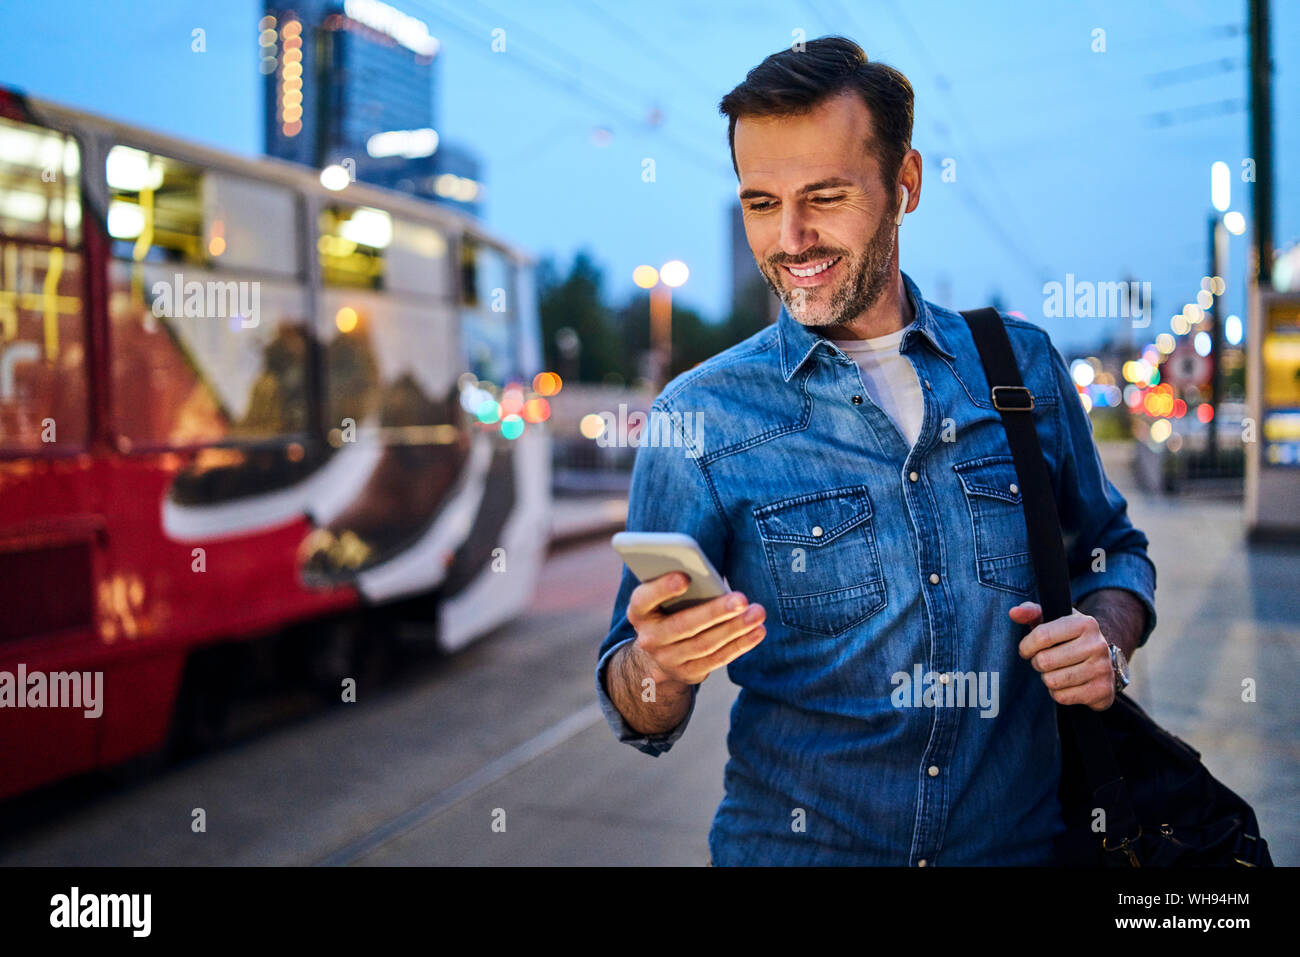 Man using smartphone and listening to music while standing at tram stop in the evening Stock Photo